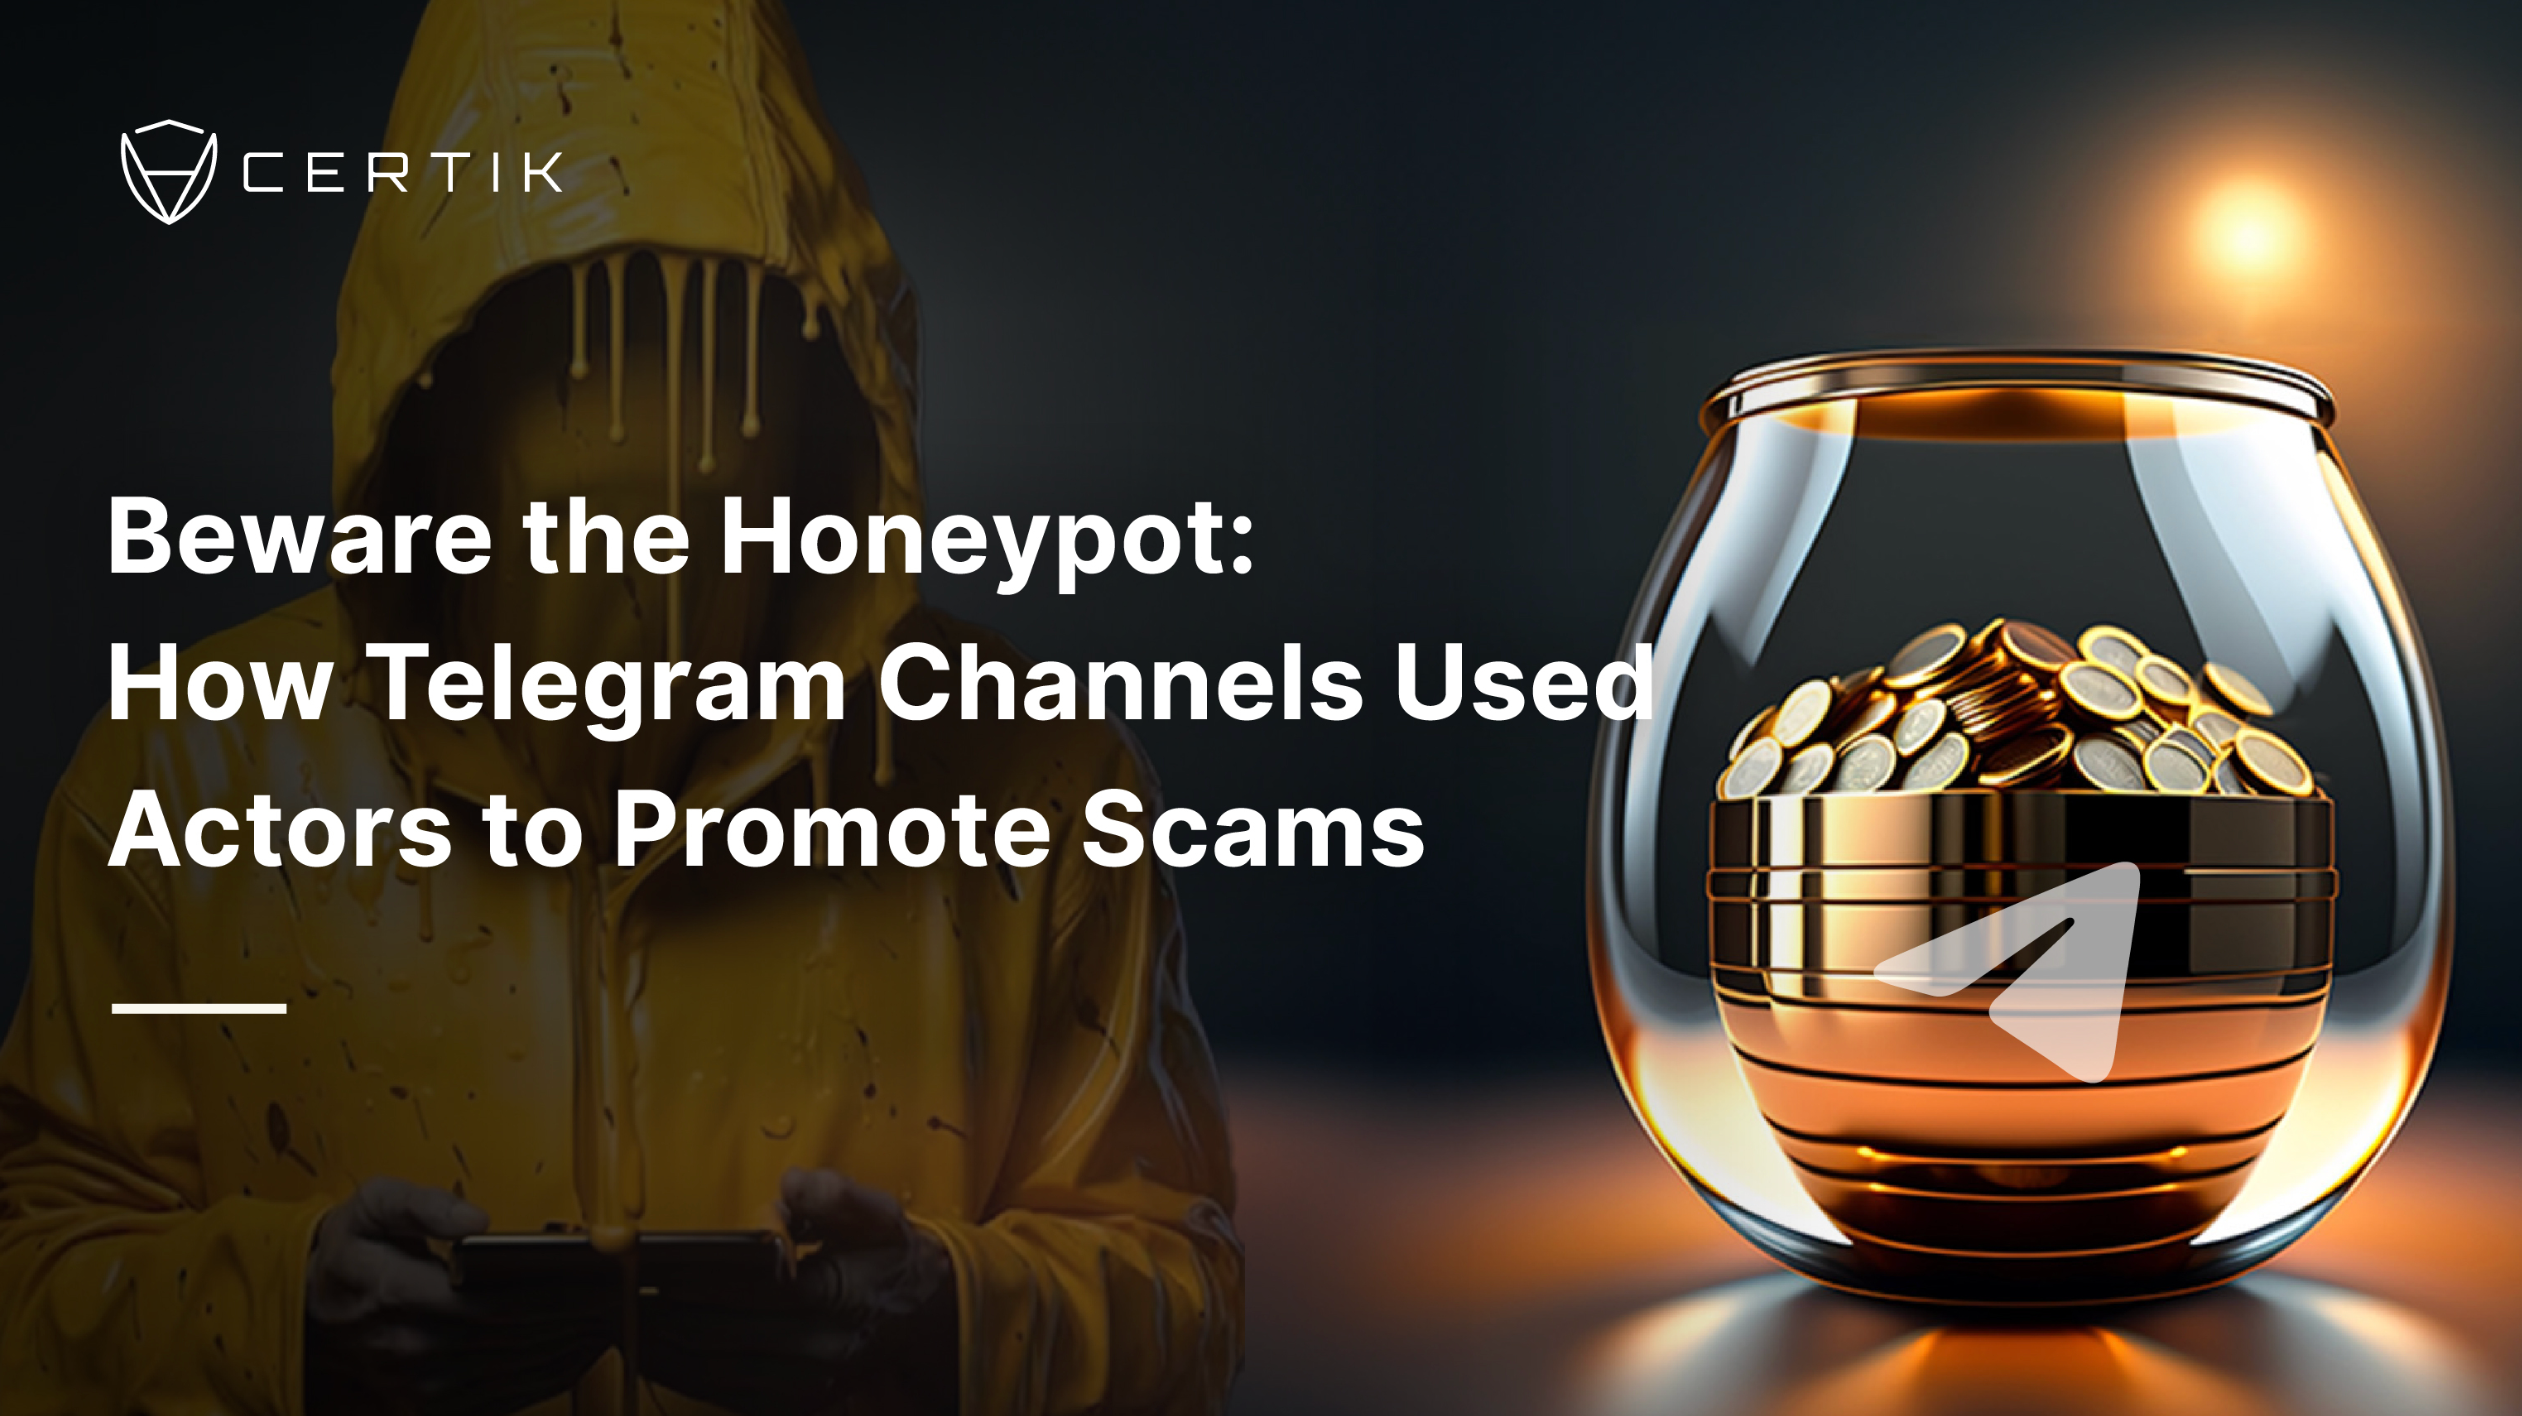 Beware the Honeypot: How Telegram Channels Used Actors to Promote Scams